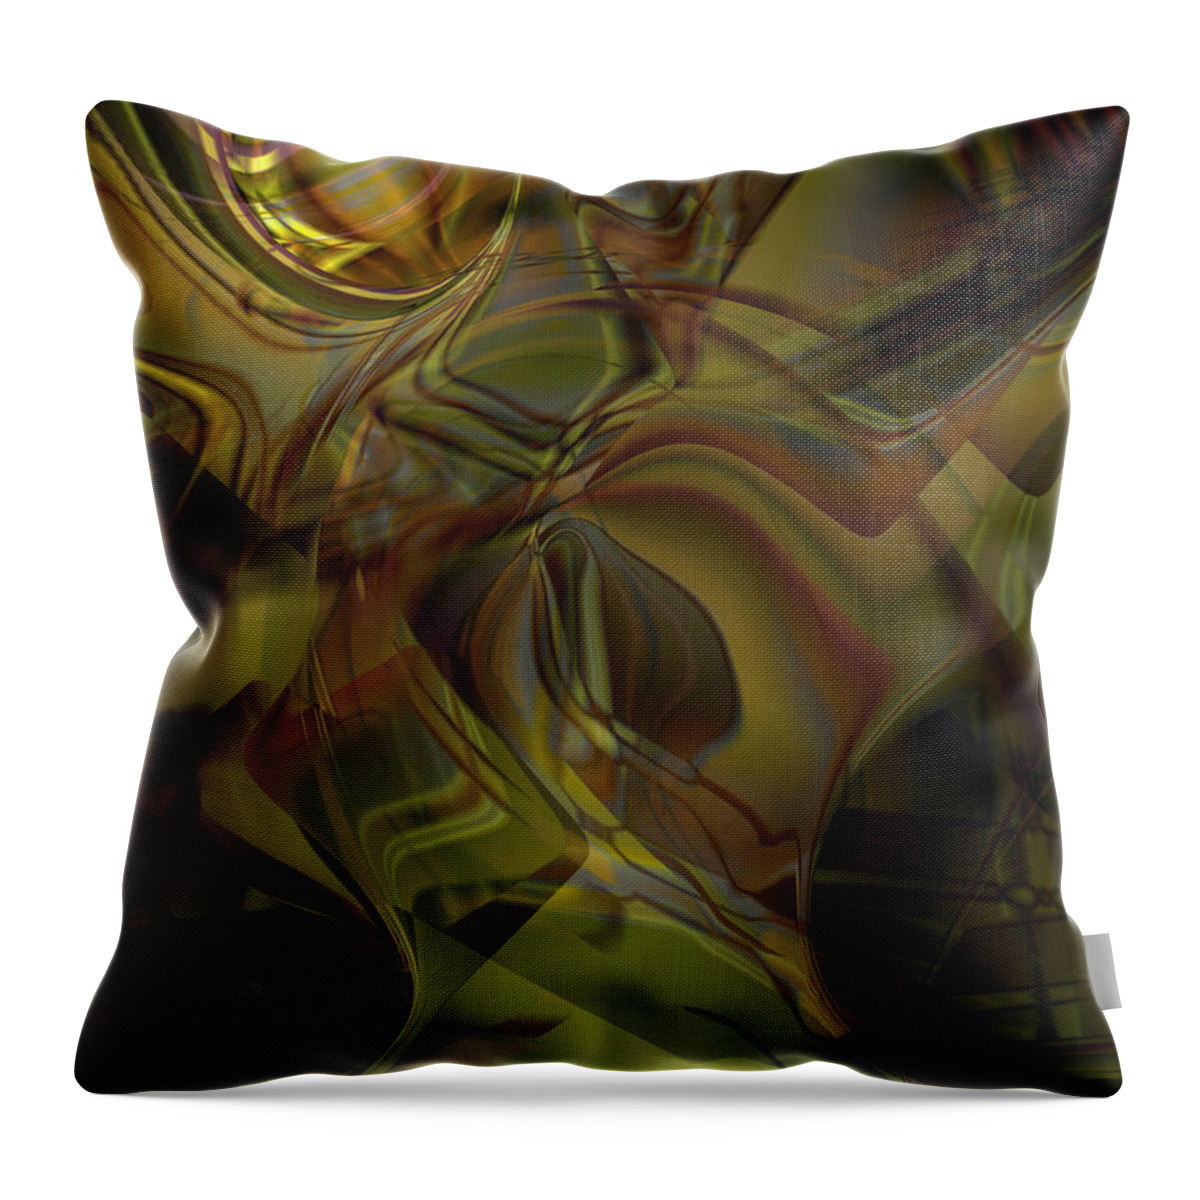 Mighty Sight Studio Throw Pillow featuring the digital art Extraterium by Steve Sperry